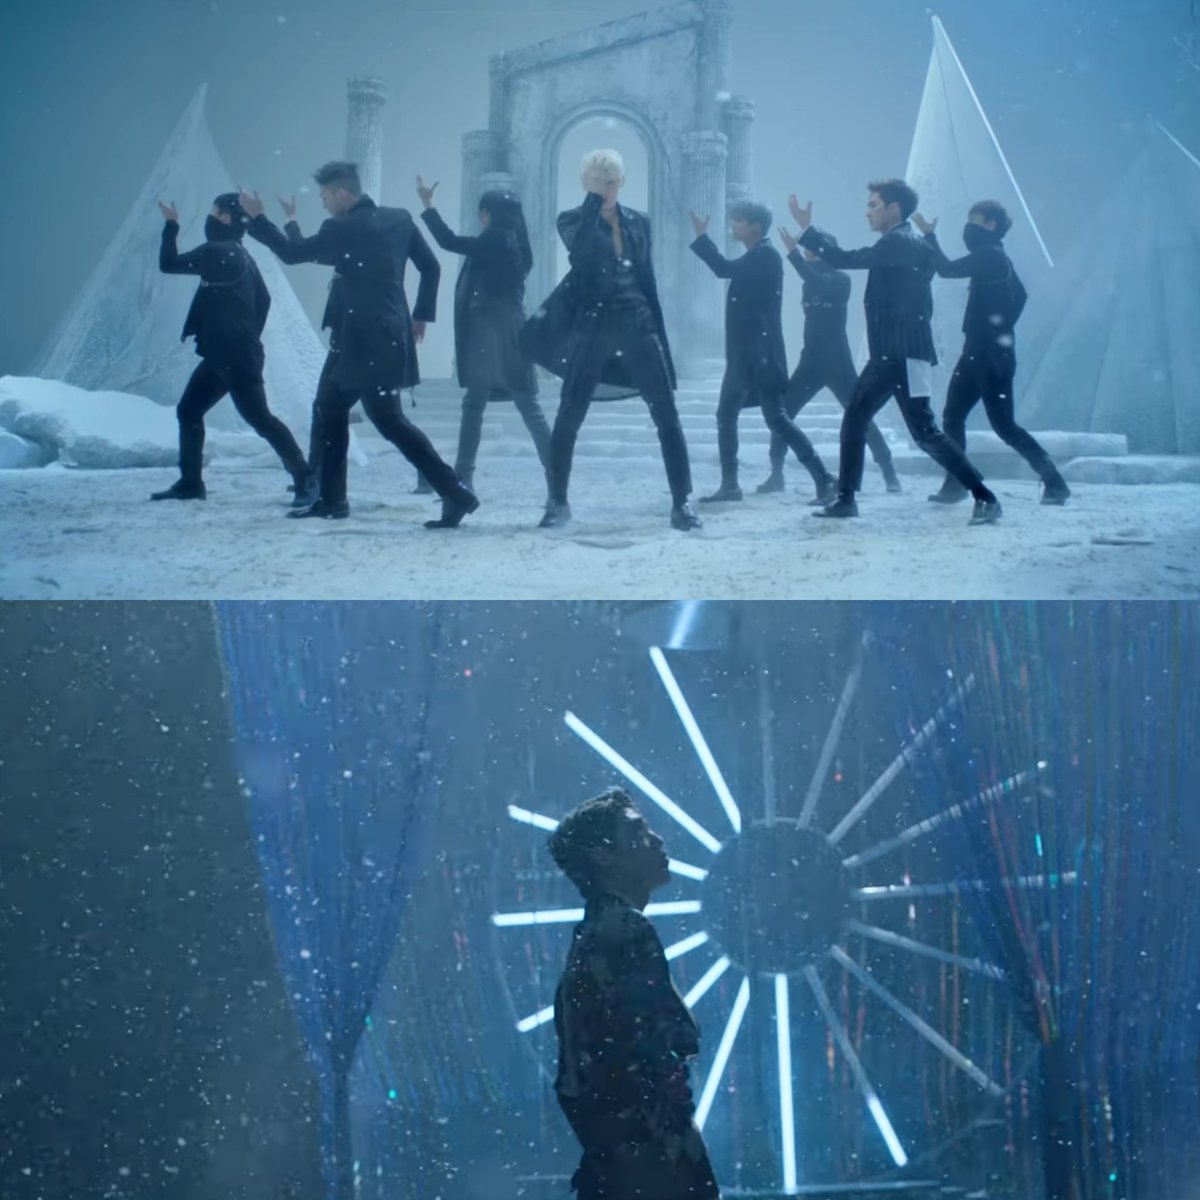 Pleiades as a sign of season changing are also the reason why season setting is important to understand pledis groups storyline thru their mvs. the seasons where Pleiades rises in dawn (spring-autumn) is lively, while in winter its dark, as everyone fall into deep sleep